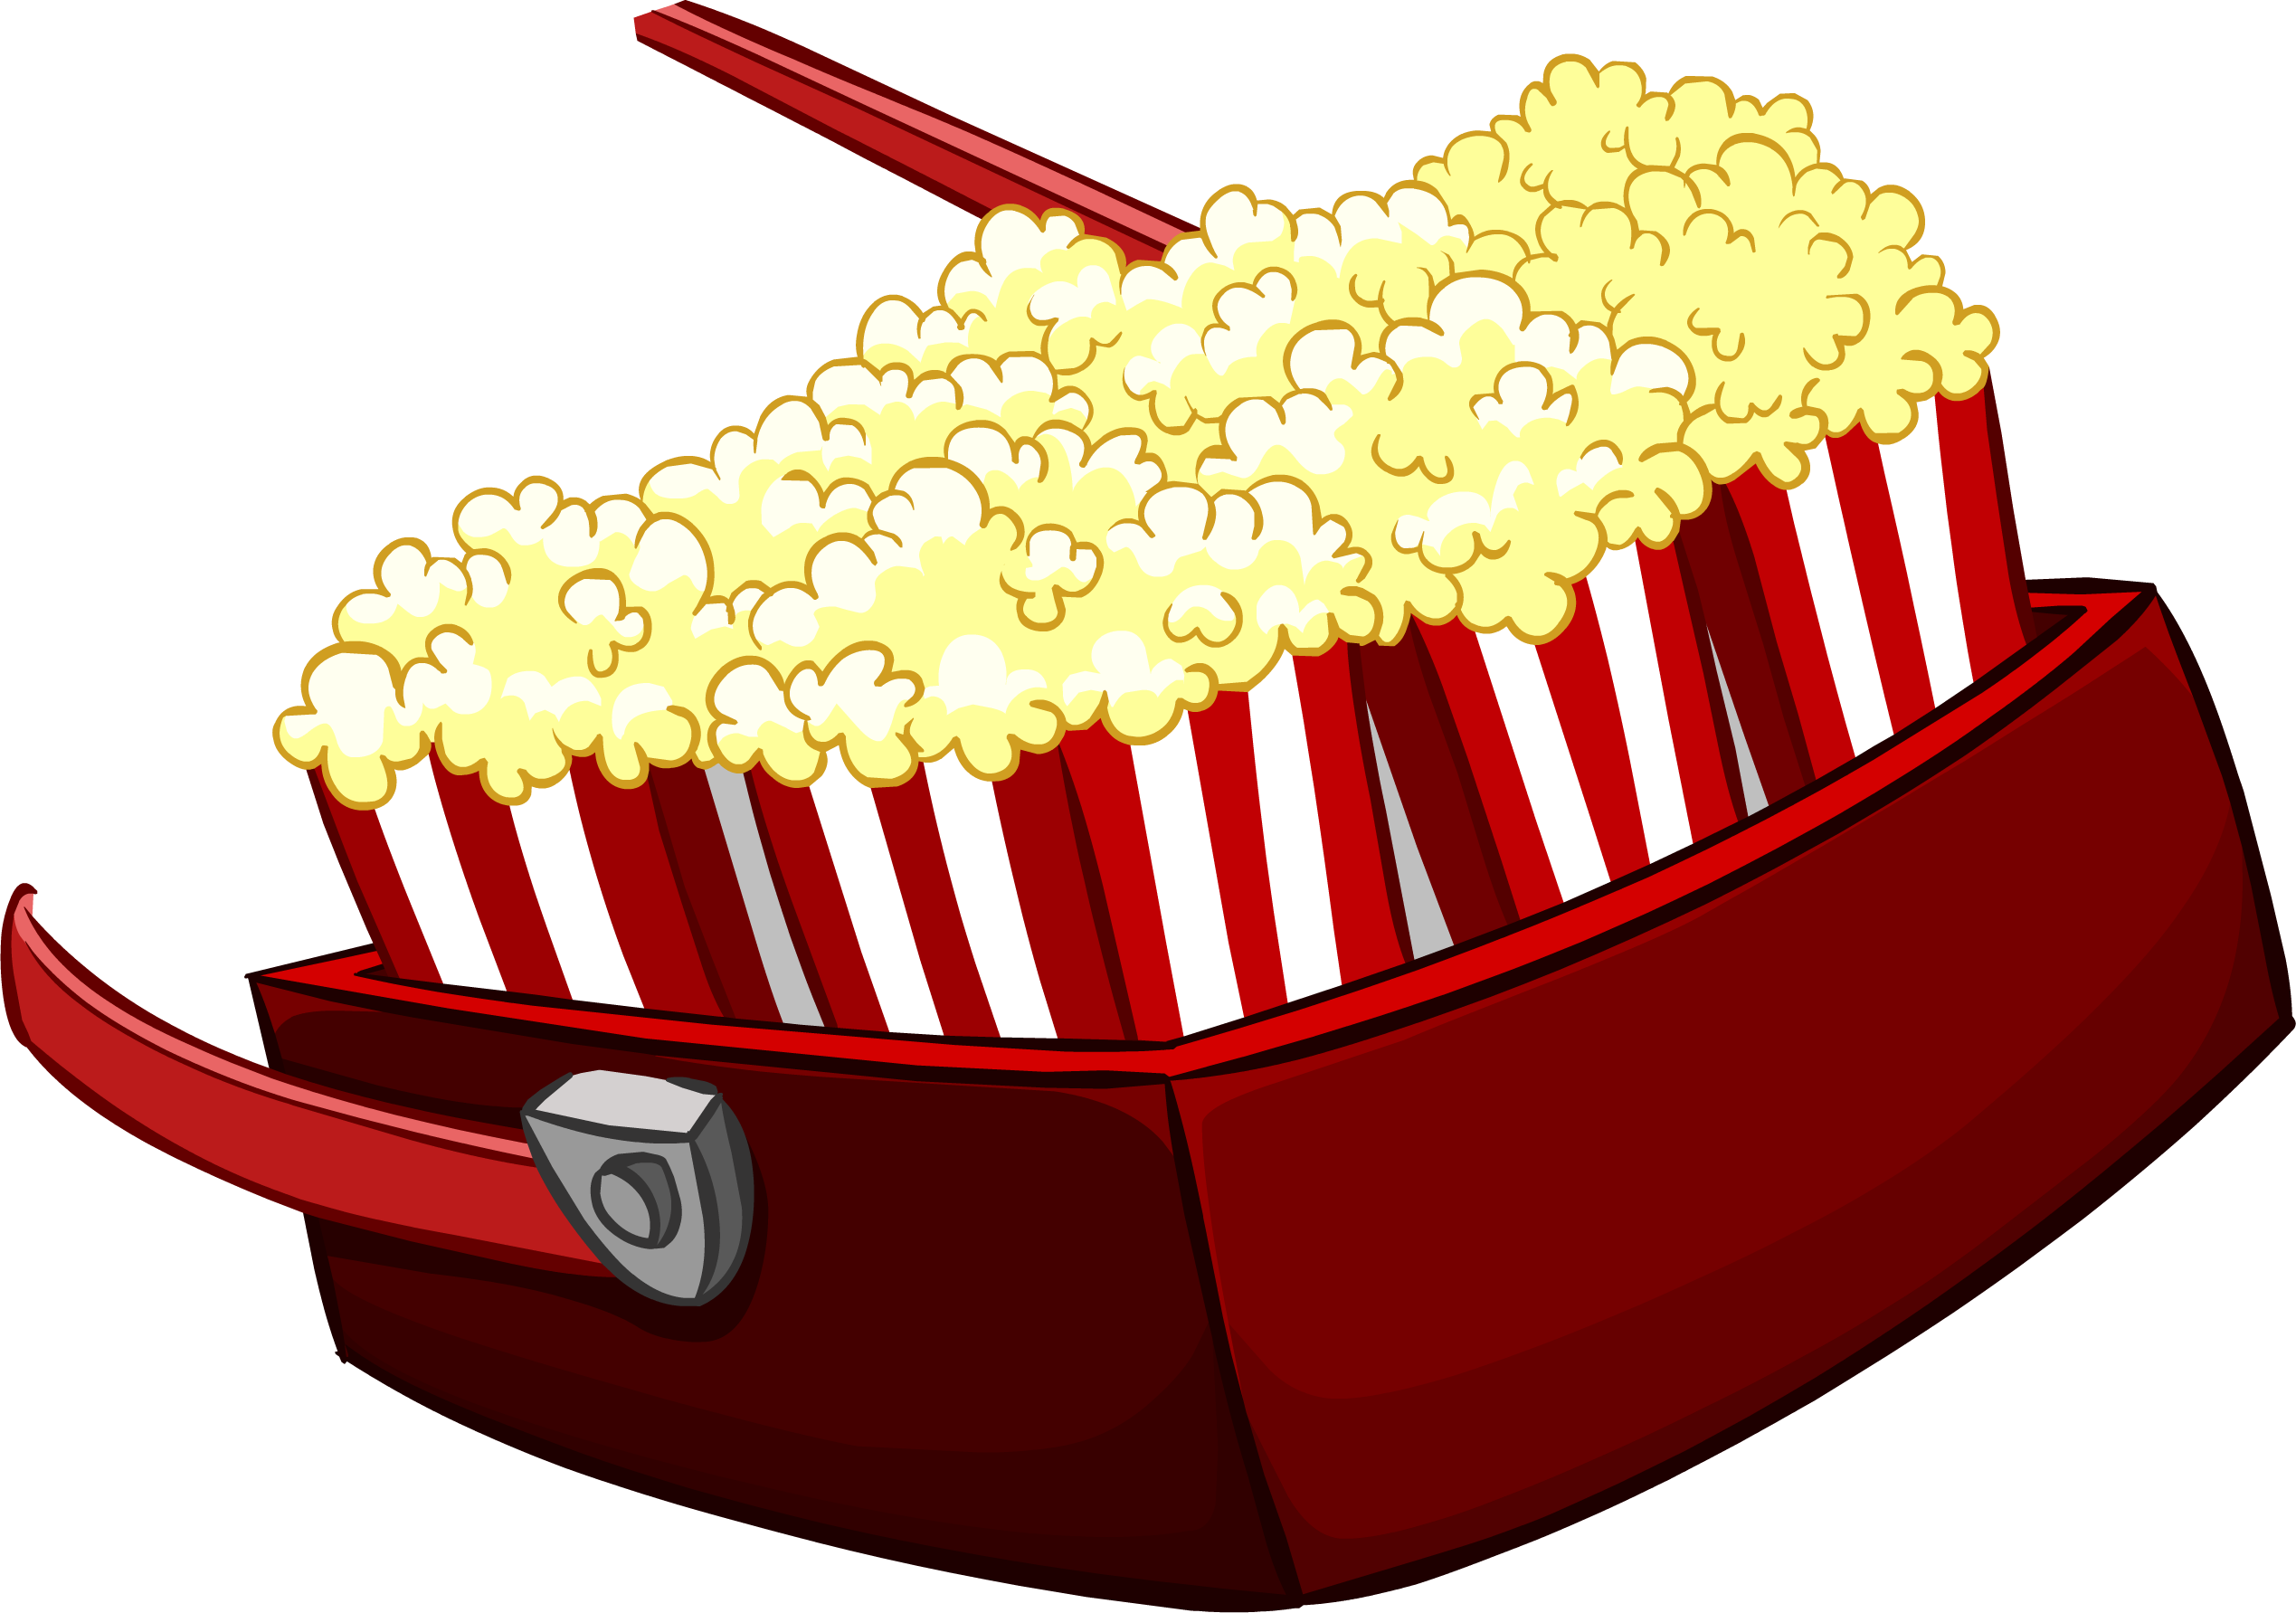 Popcorn Png - Club Penguin Popcorn Tray (2538x1783), Png Download